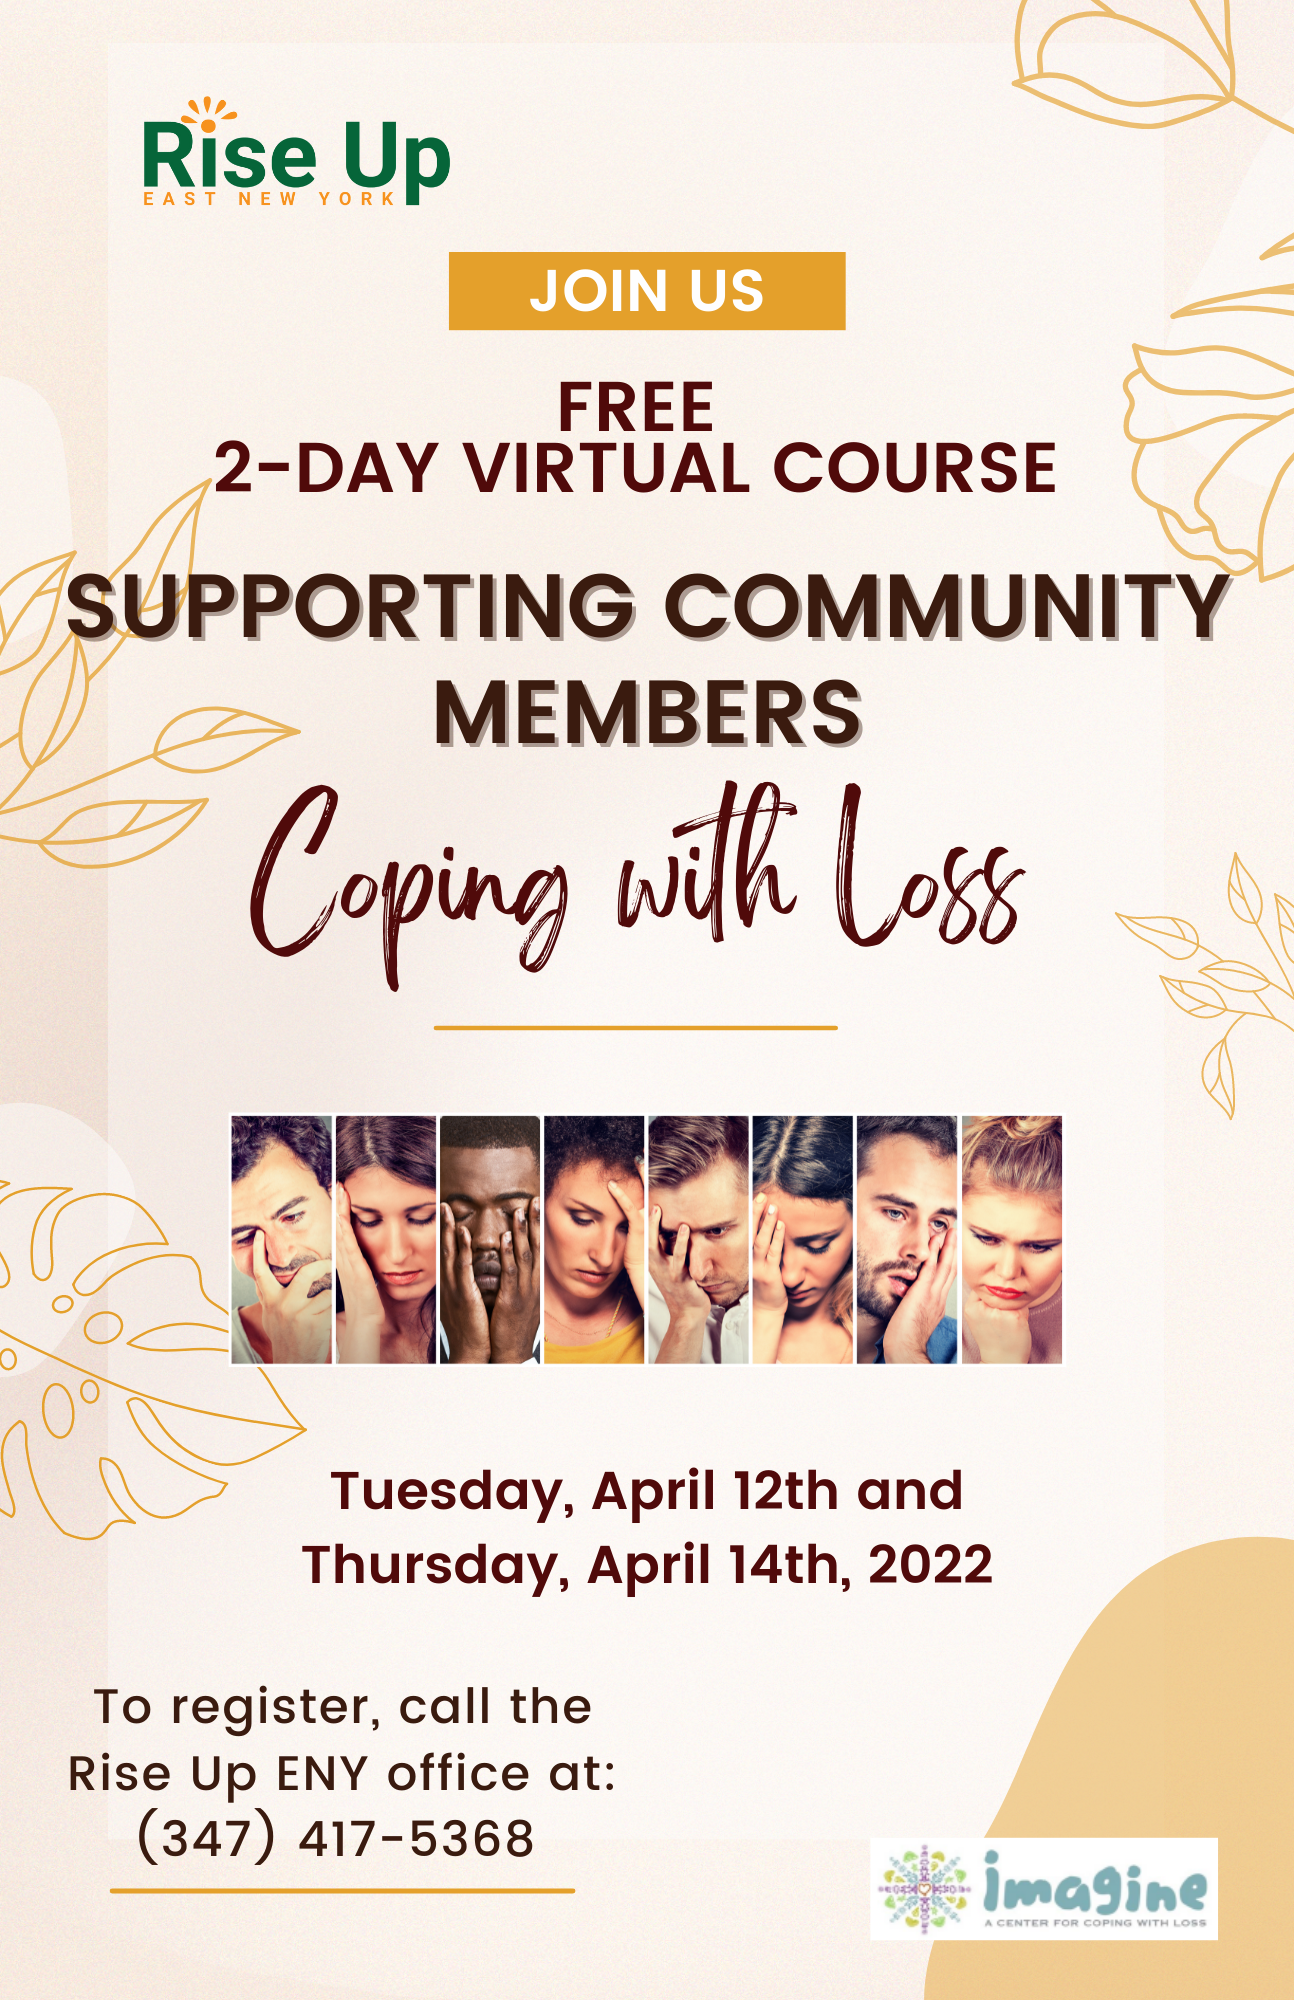 SUPPORTING COMMUNITY MEMBERS: “Coping with Loss”